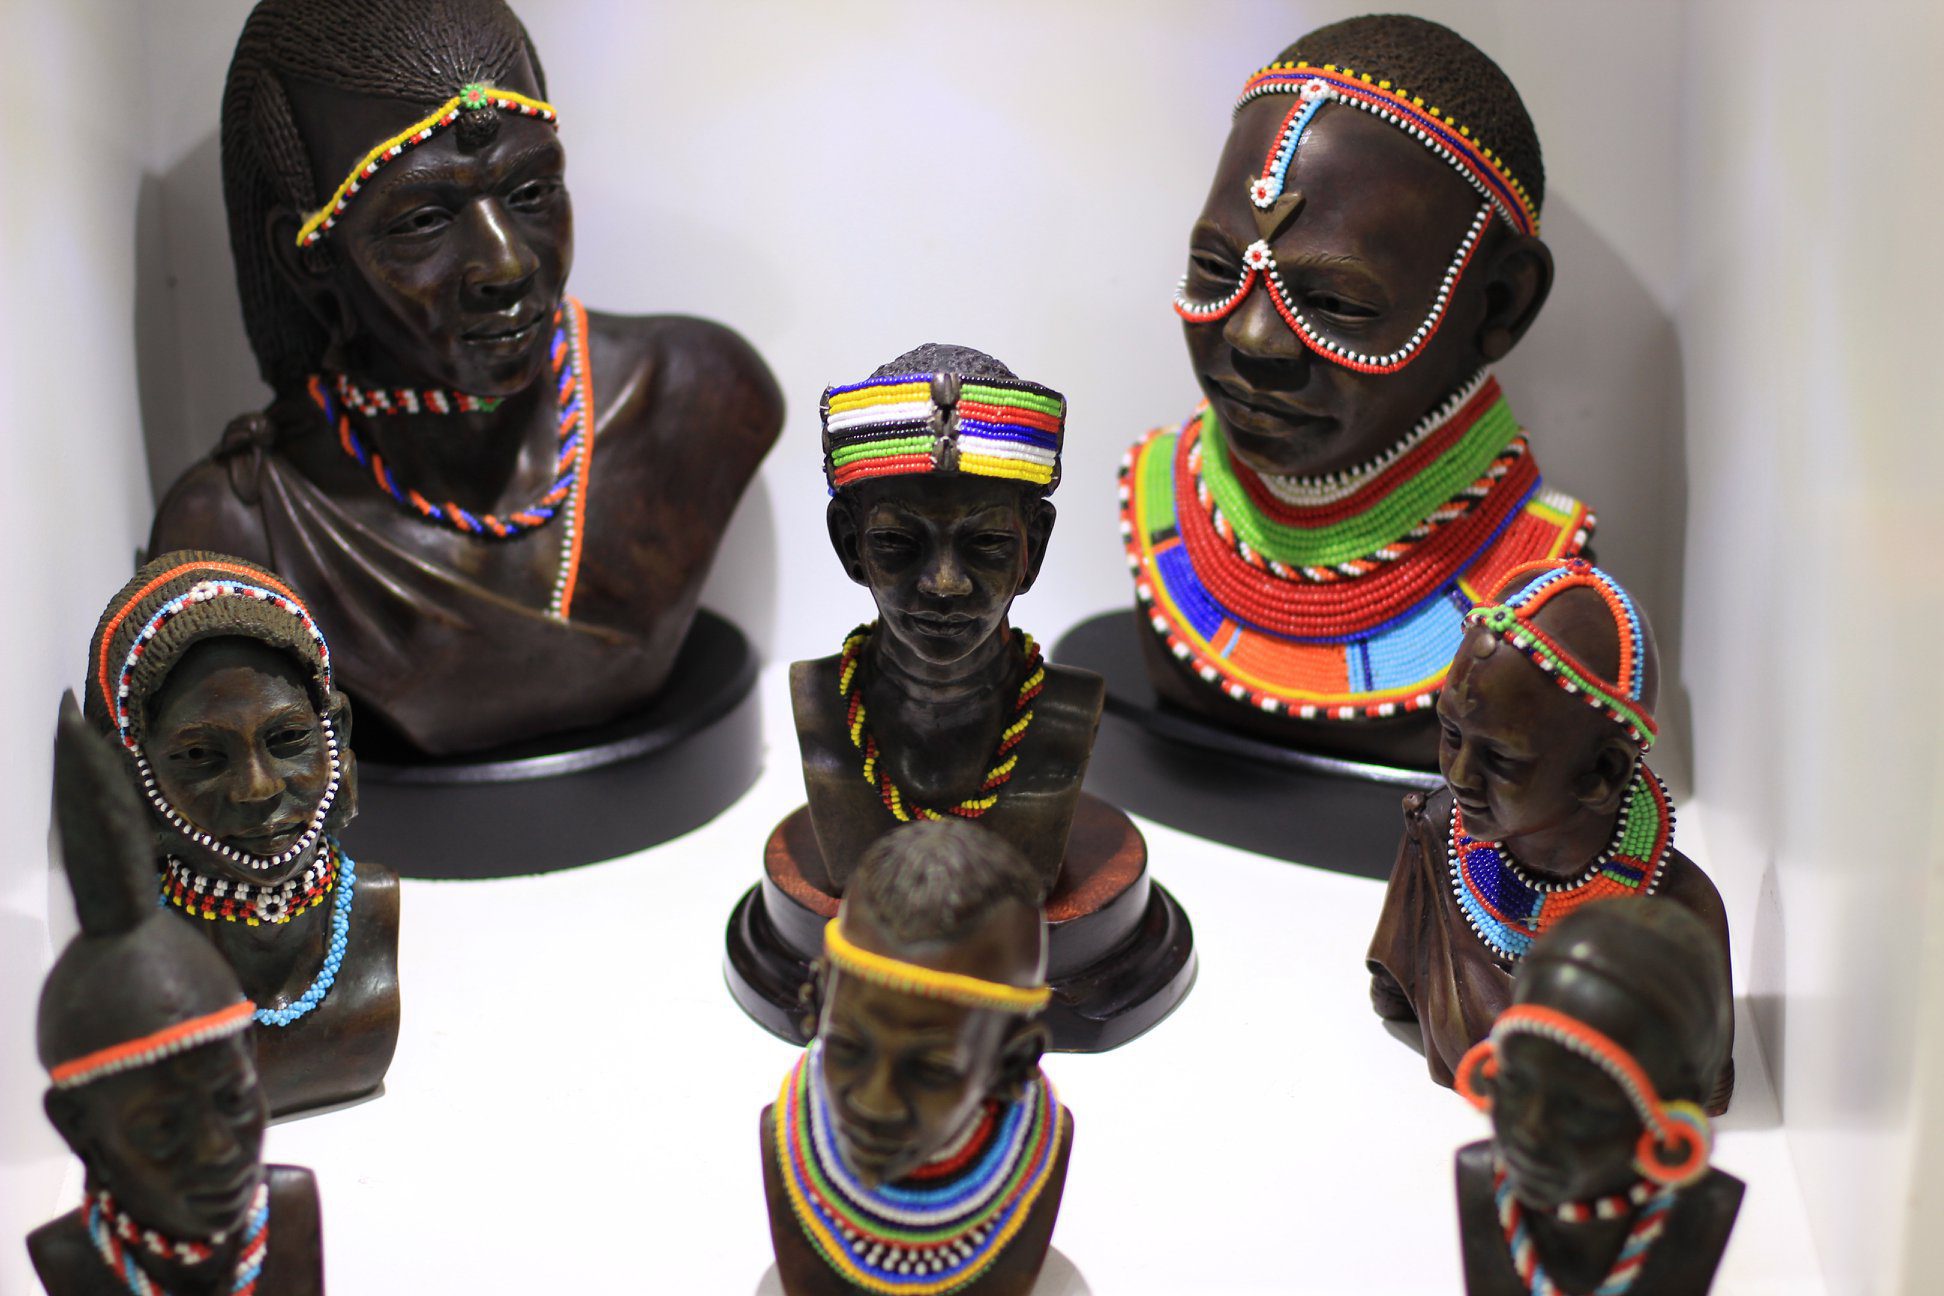 The Village Market houses a variety of African artifacts and exhibits. ©The Village Market